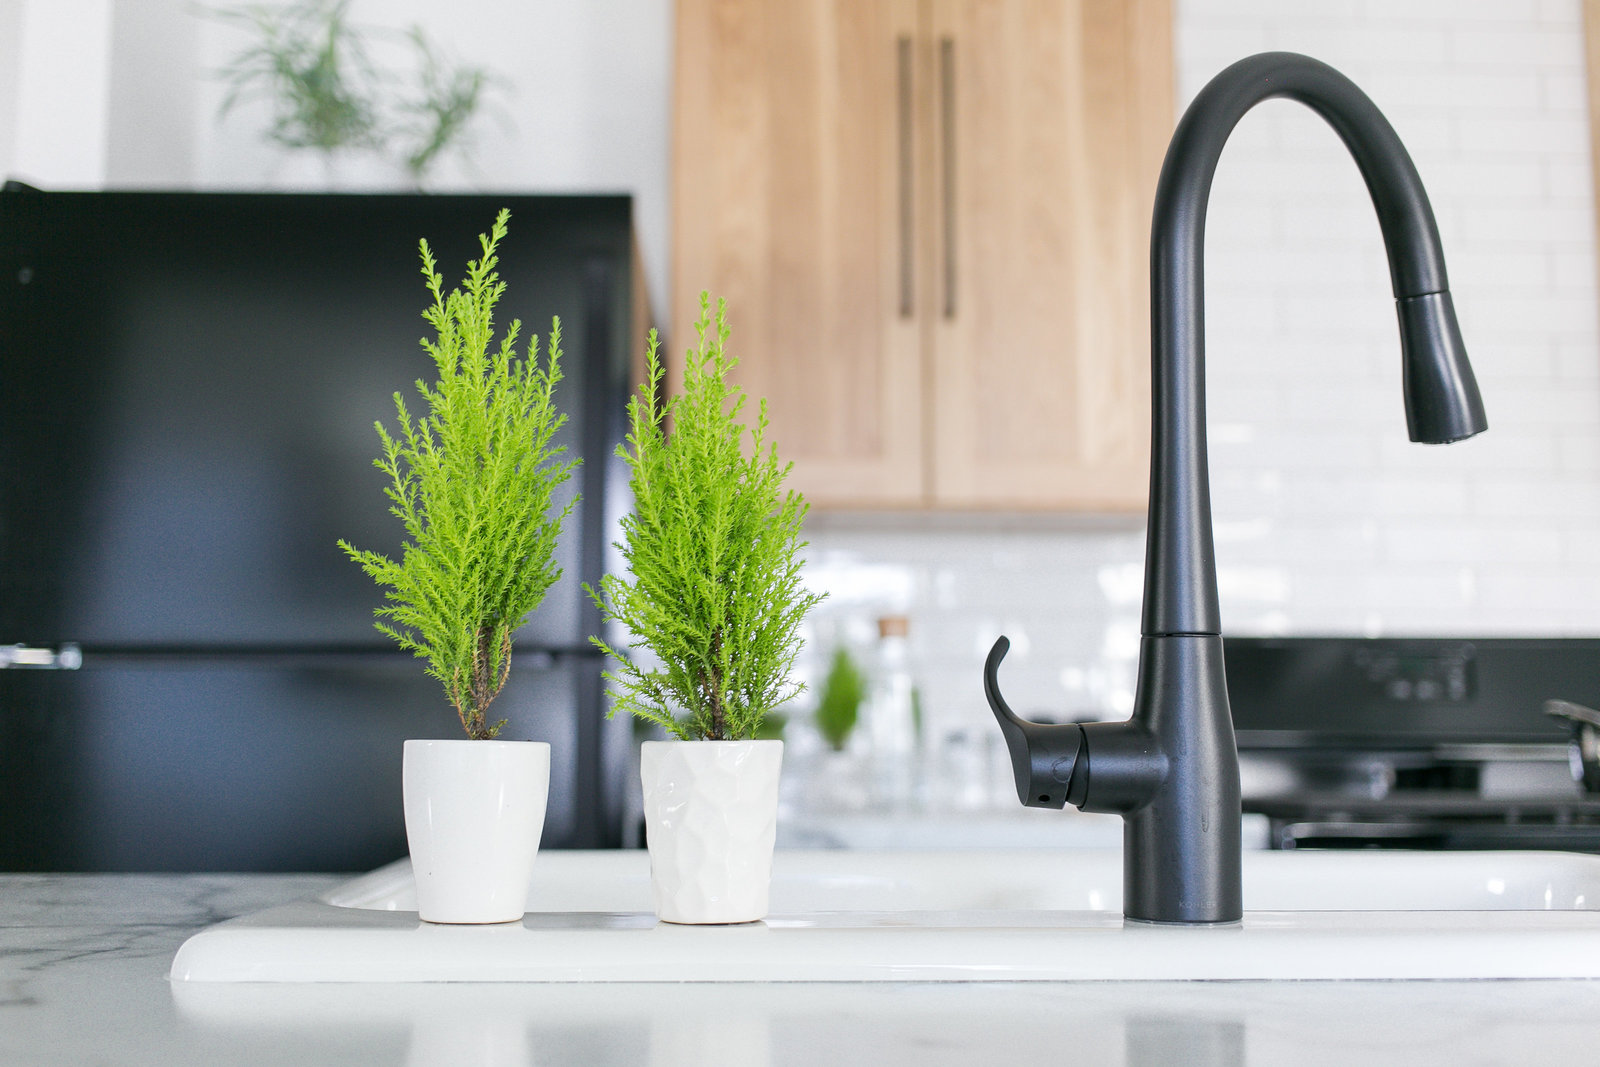 Modern BnB kitchen design with sleek black faucet, natural oak upper cabinets and pops of greenery for soft texture.